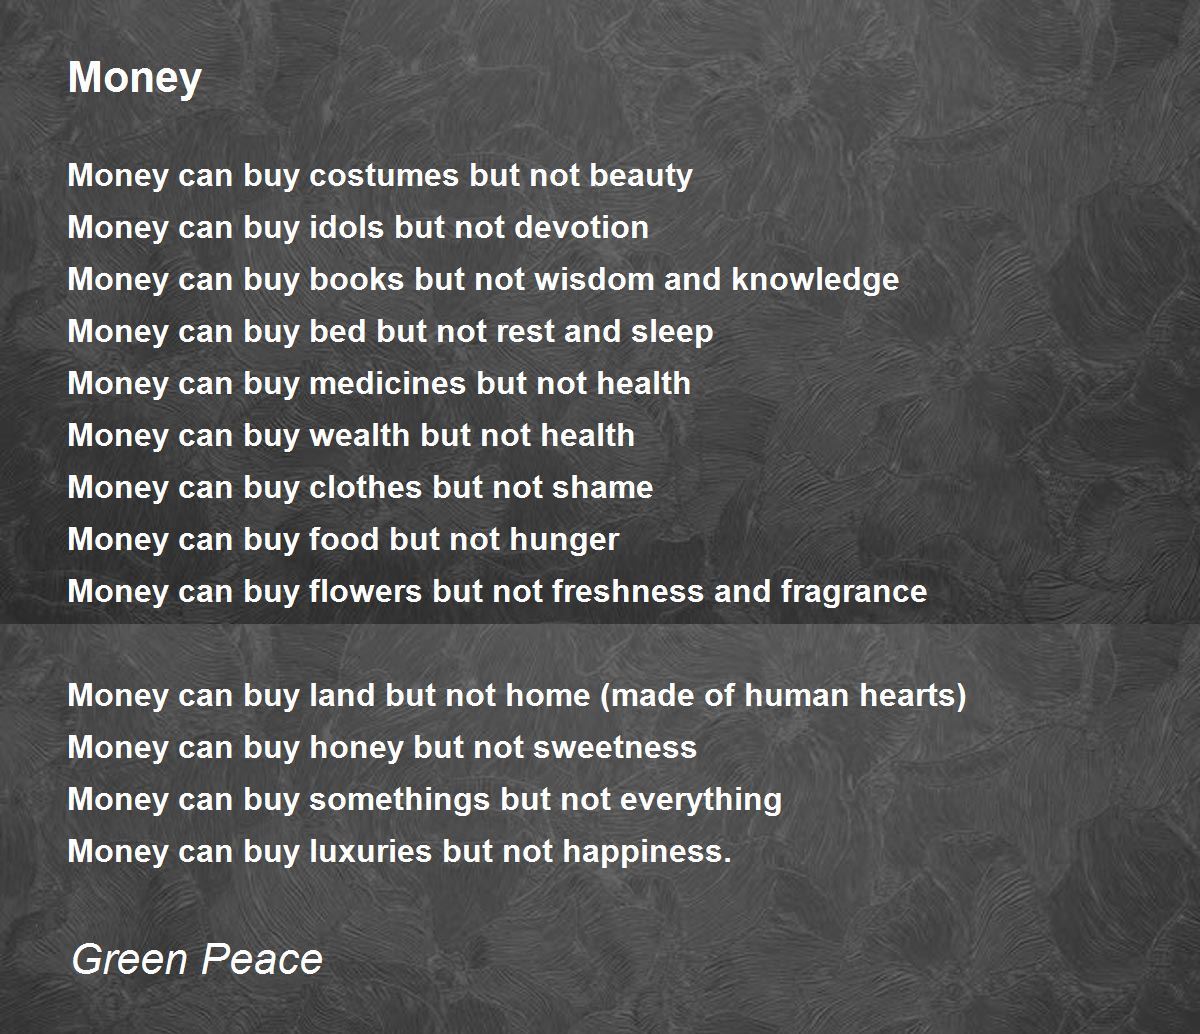 Essay on can money buy love